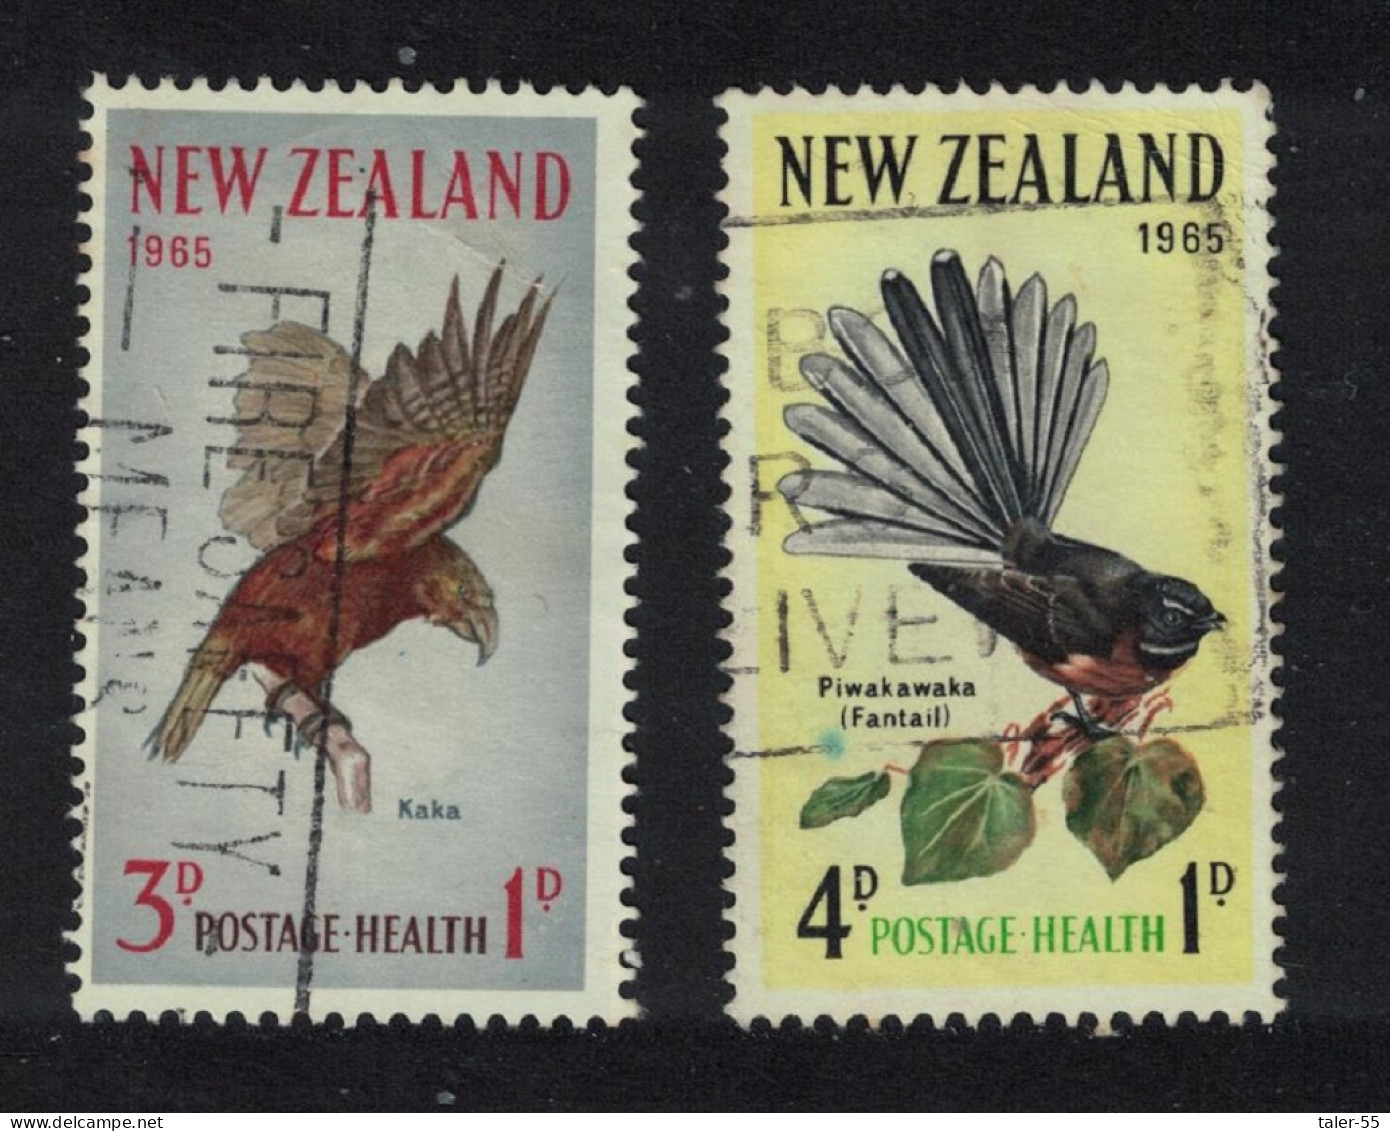 New Zealand Kaka Collared Grey Fantail Birds 2v 1965 Canc SG#831-832 MI#442-443 SC#B69a-B70a - Used Stamps